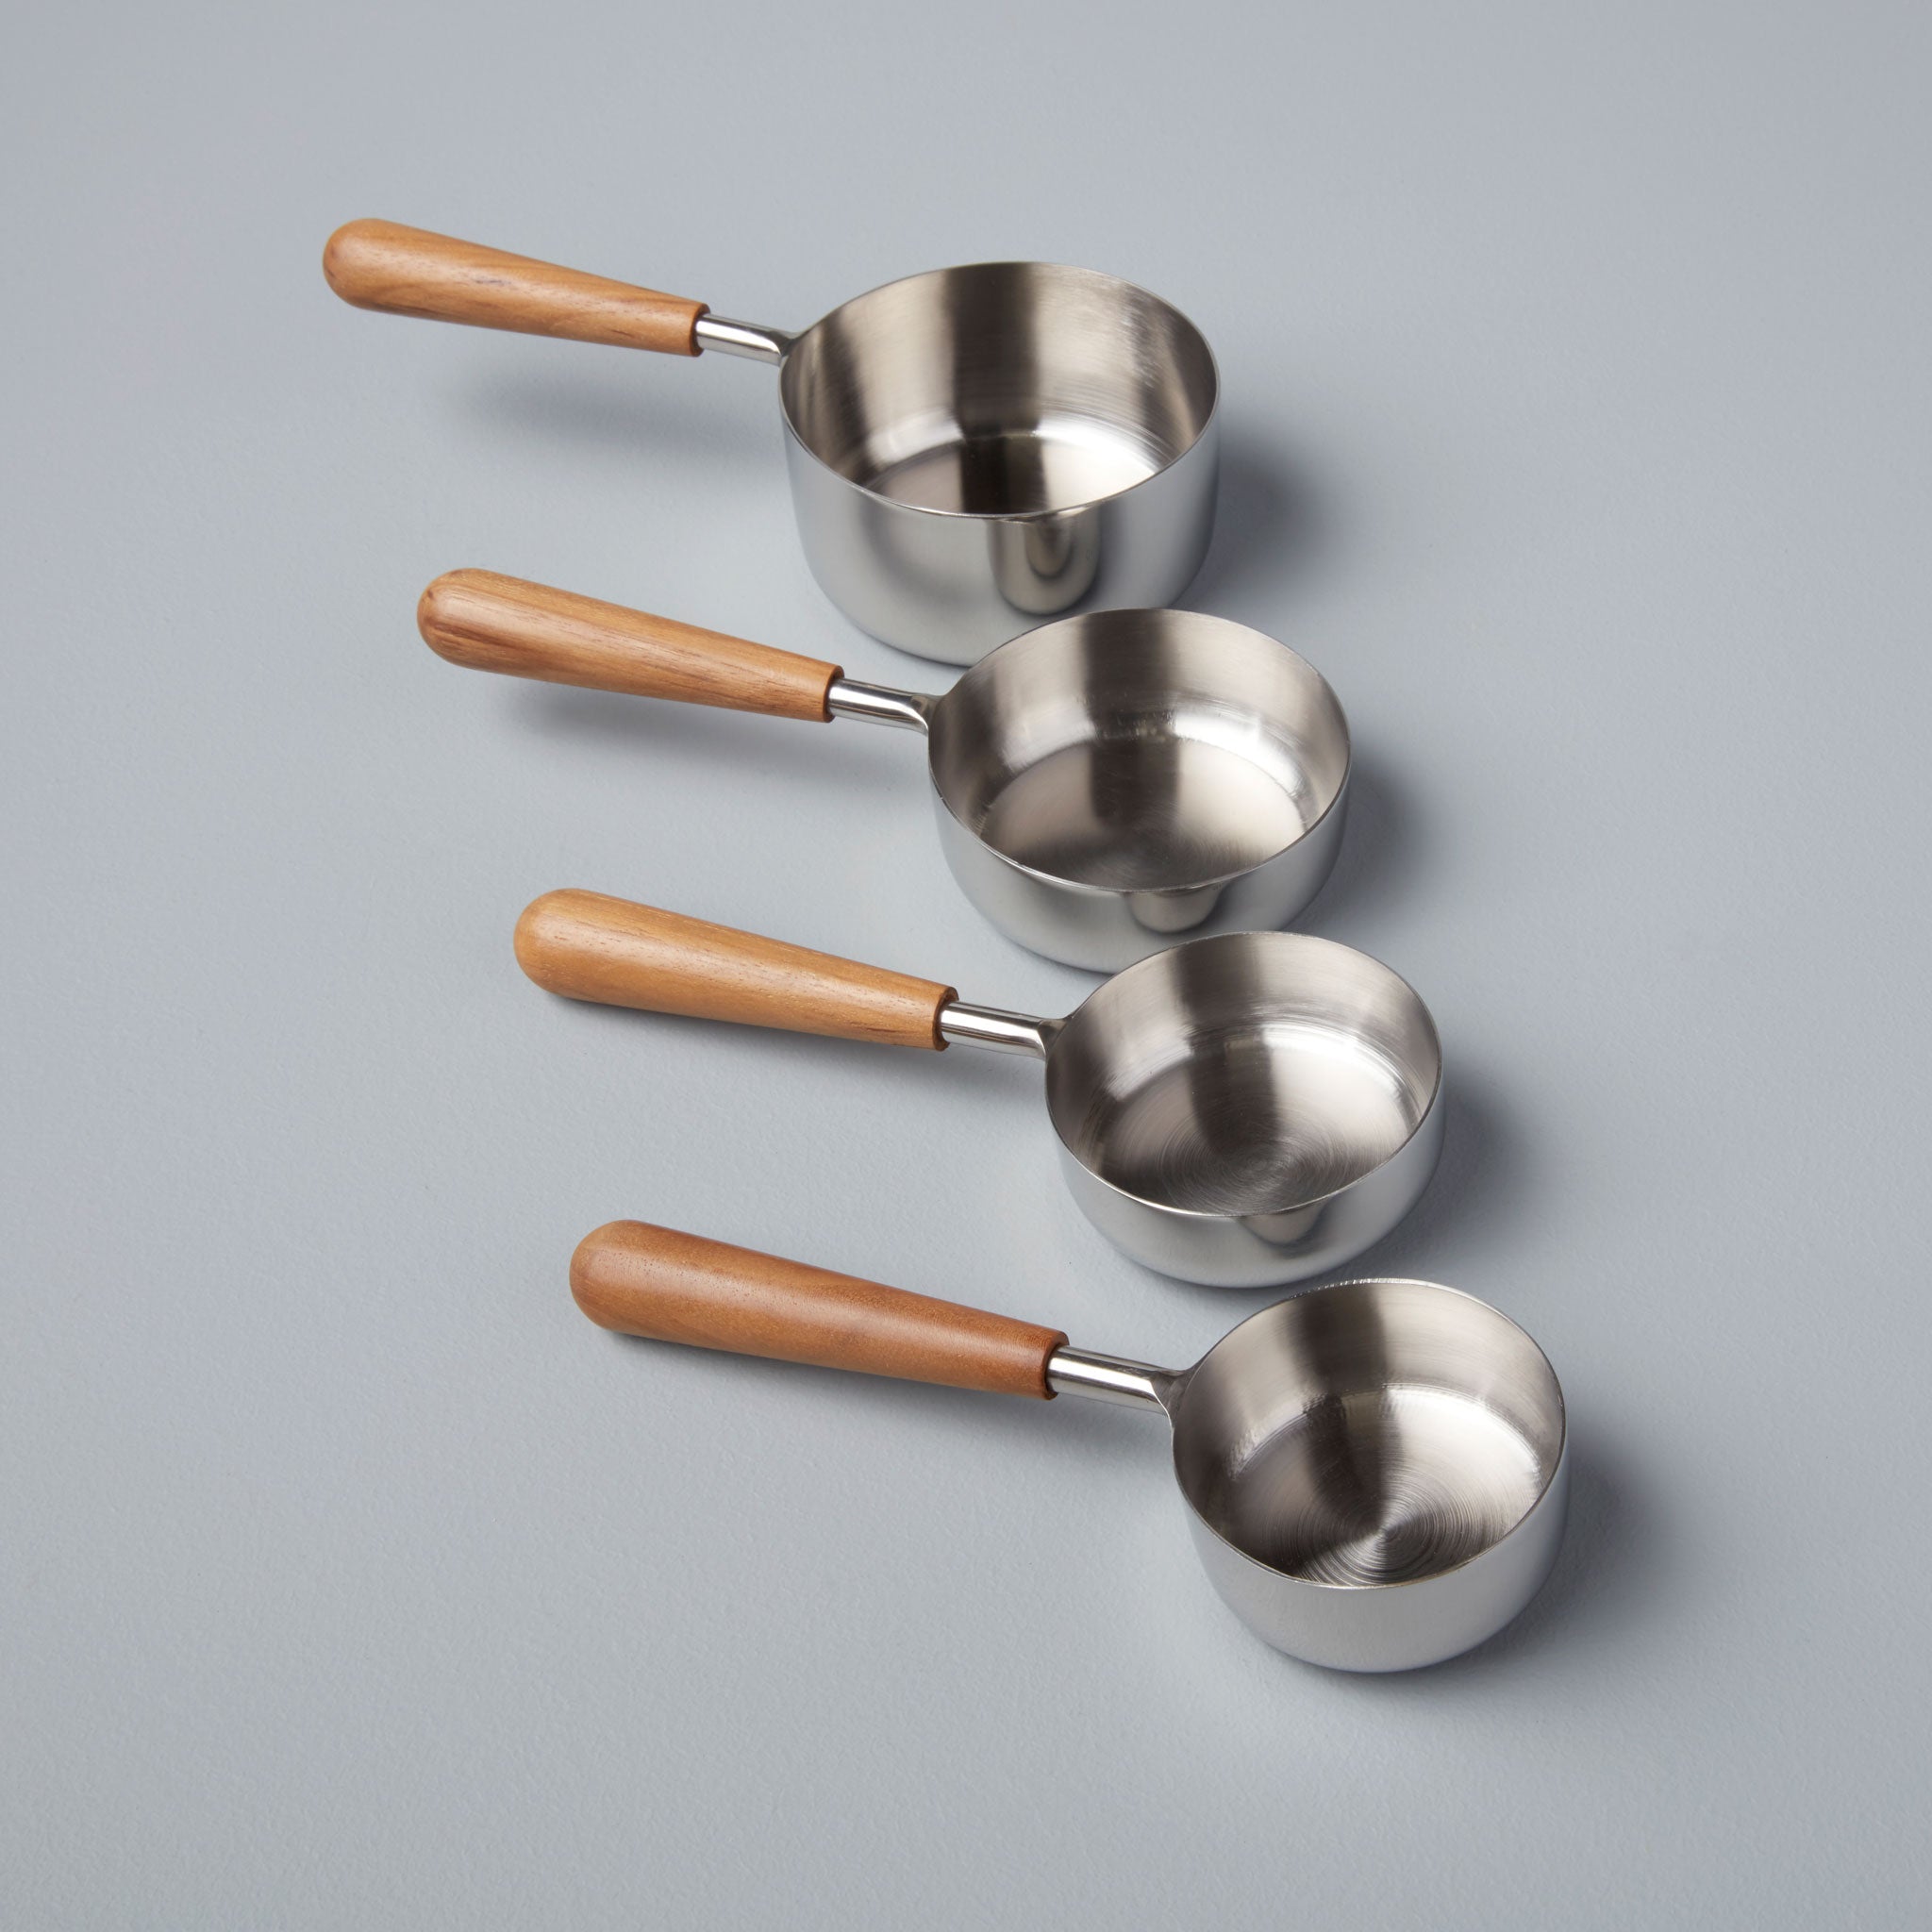 https://behome.com/cdn/shop/products/Be-Home_Teak-and-Stainless-Measuring-Cups-Set-of-4_25-19.jpg?v=1605658304&width=3840